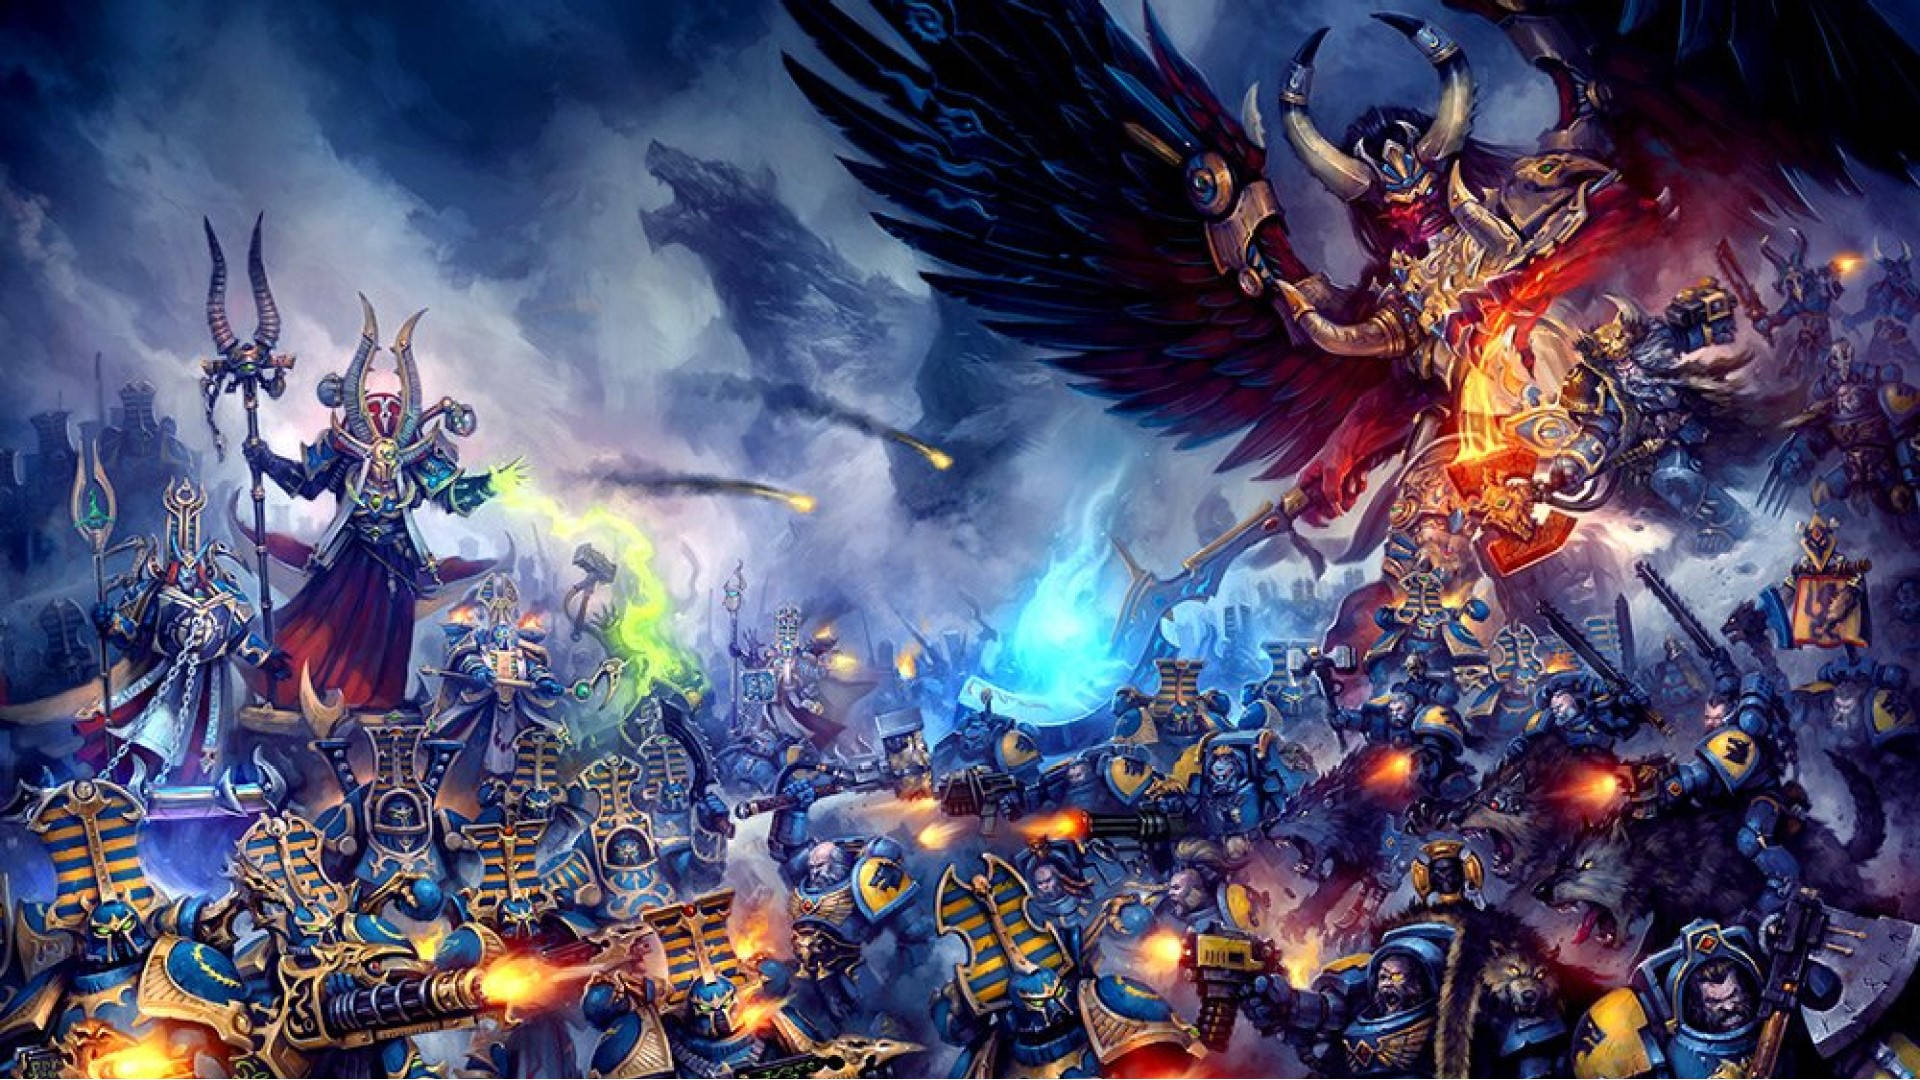 1920x1080 Download Warhammer 40k Thousand Sons Chaos Space Marines Wallpaper |